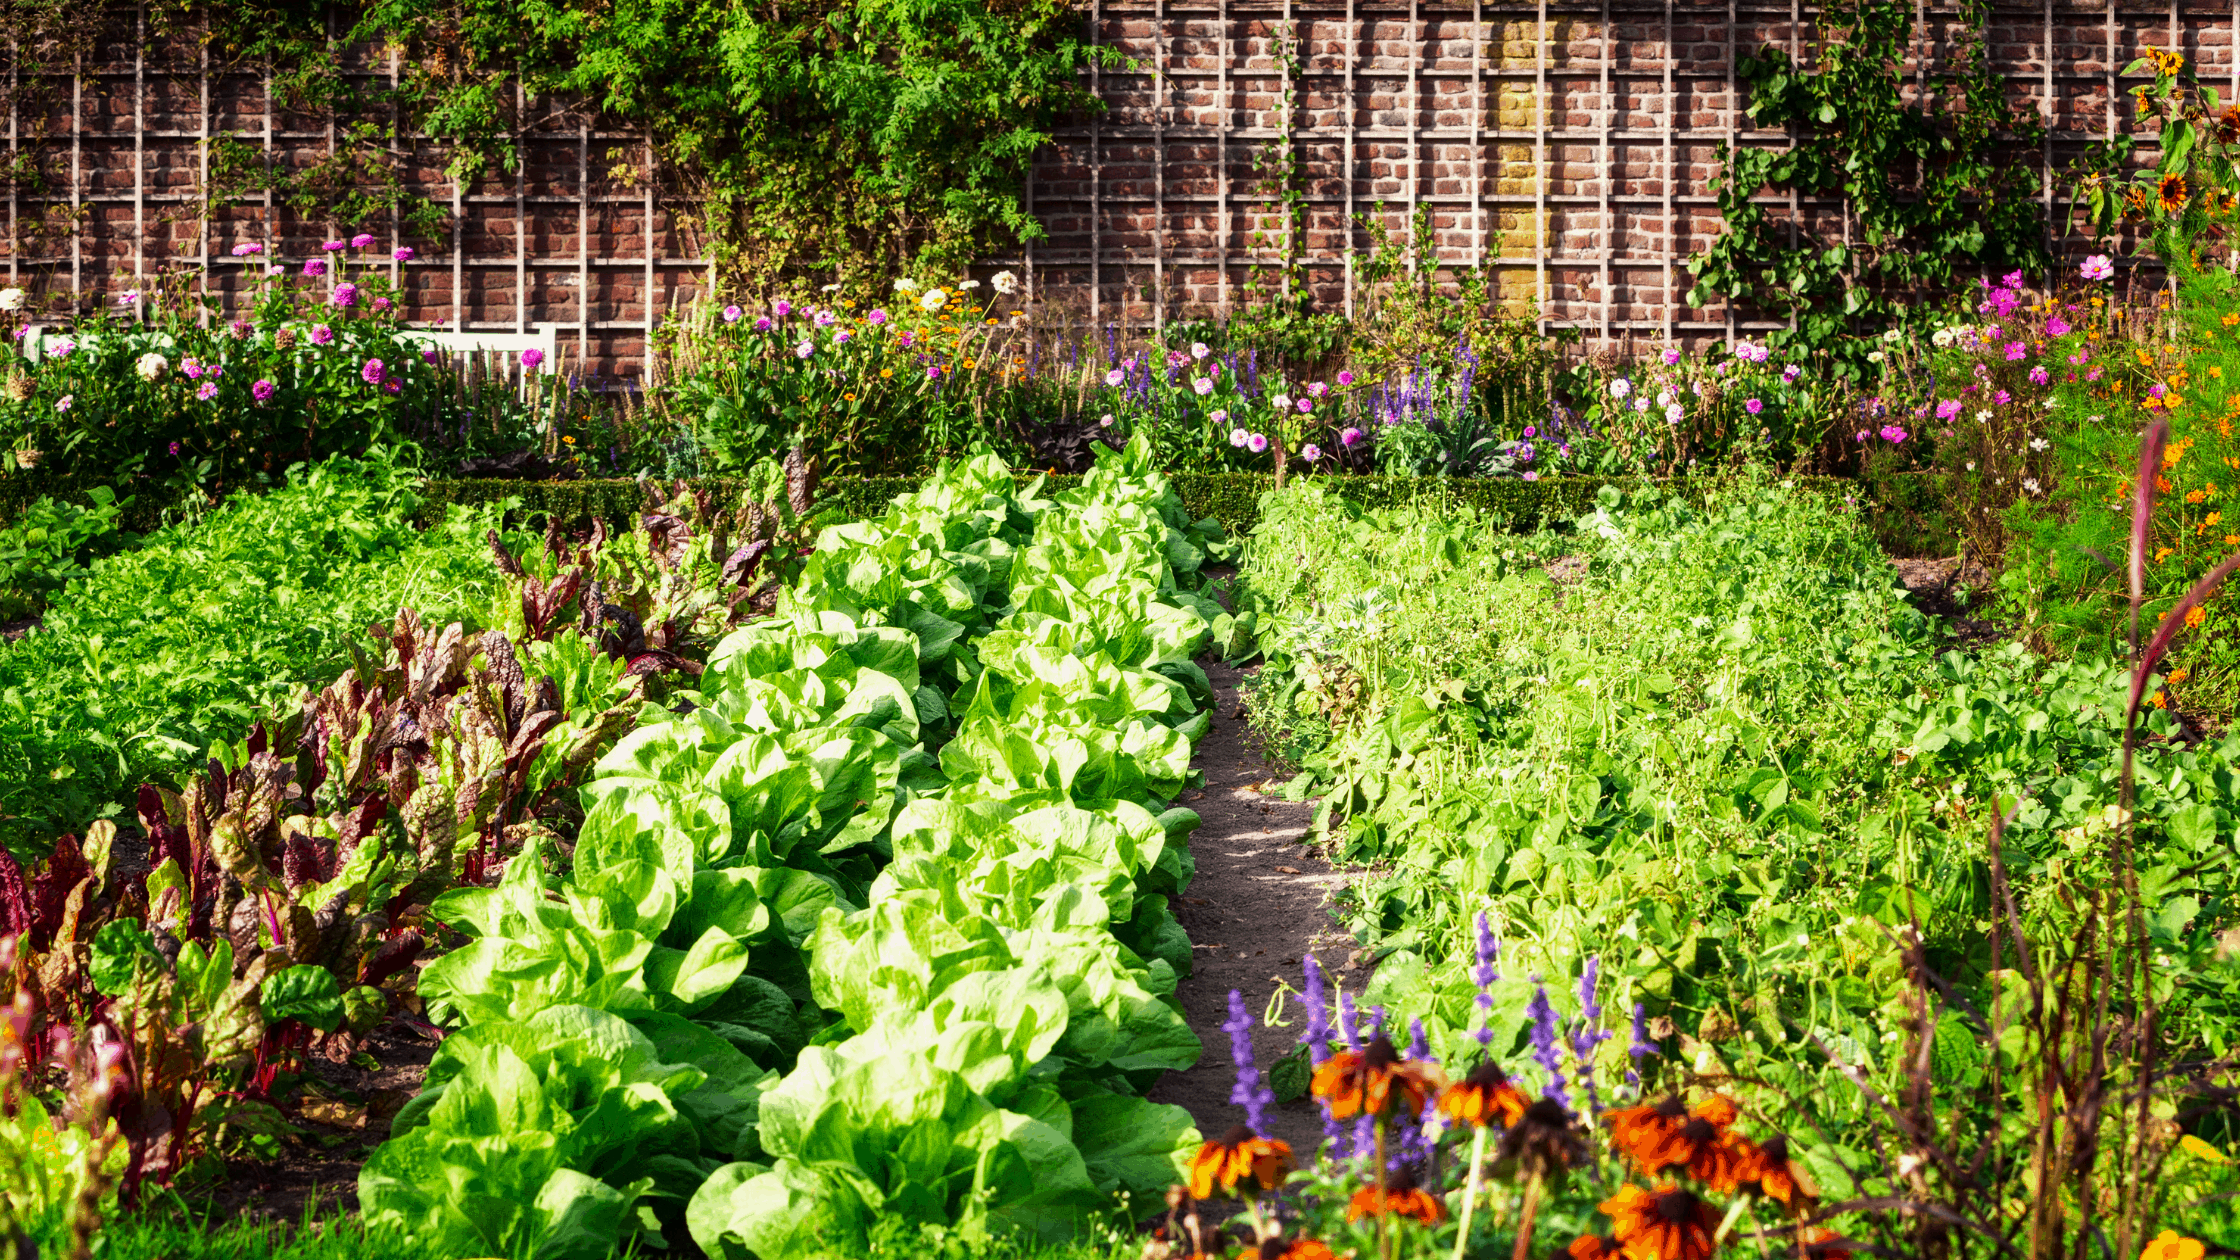 Wondering why you need to weed your vegetable garden? Check out this blog post to learn the benefits of weeding your garden.